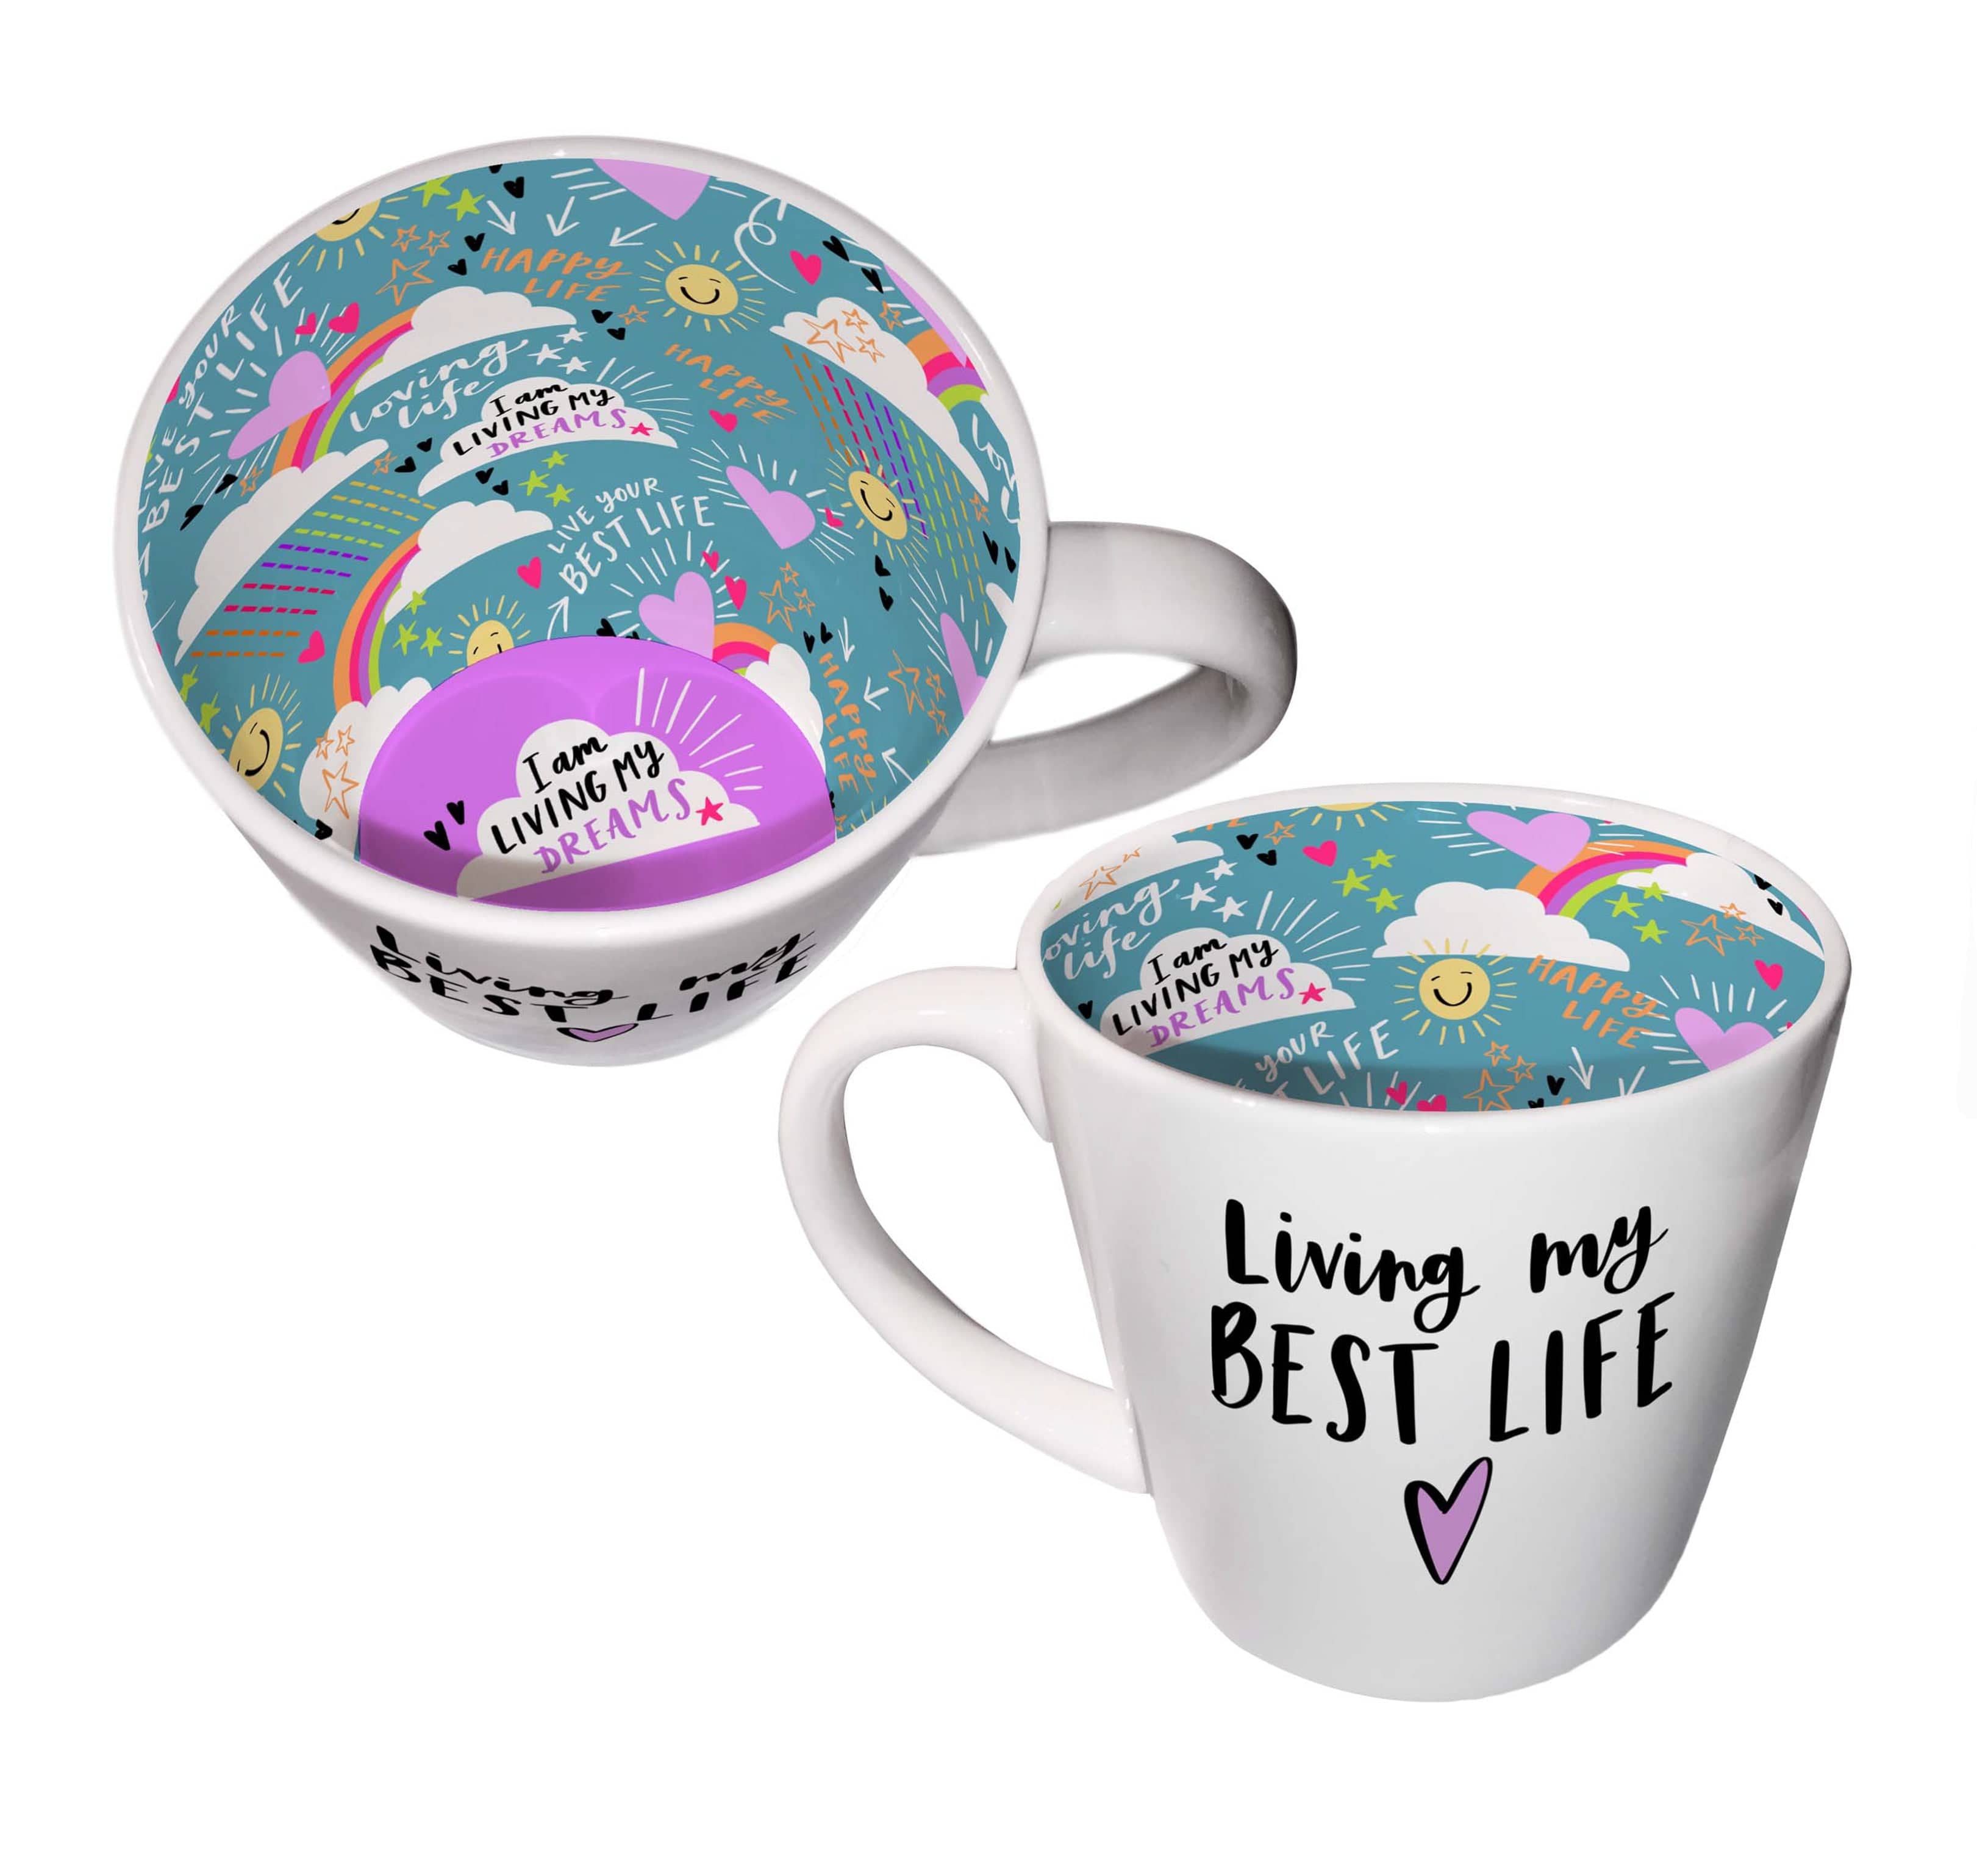 WPL Gifts Mug Inside Out Mug With Gift Box - Living my Best Life